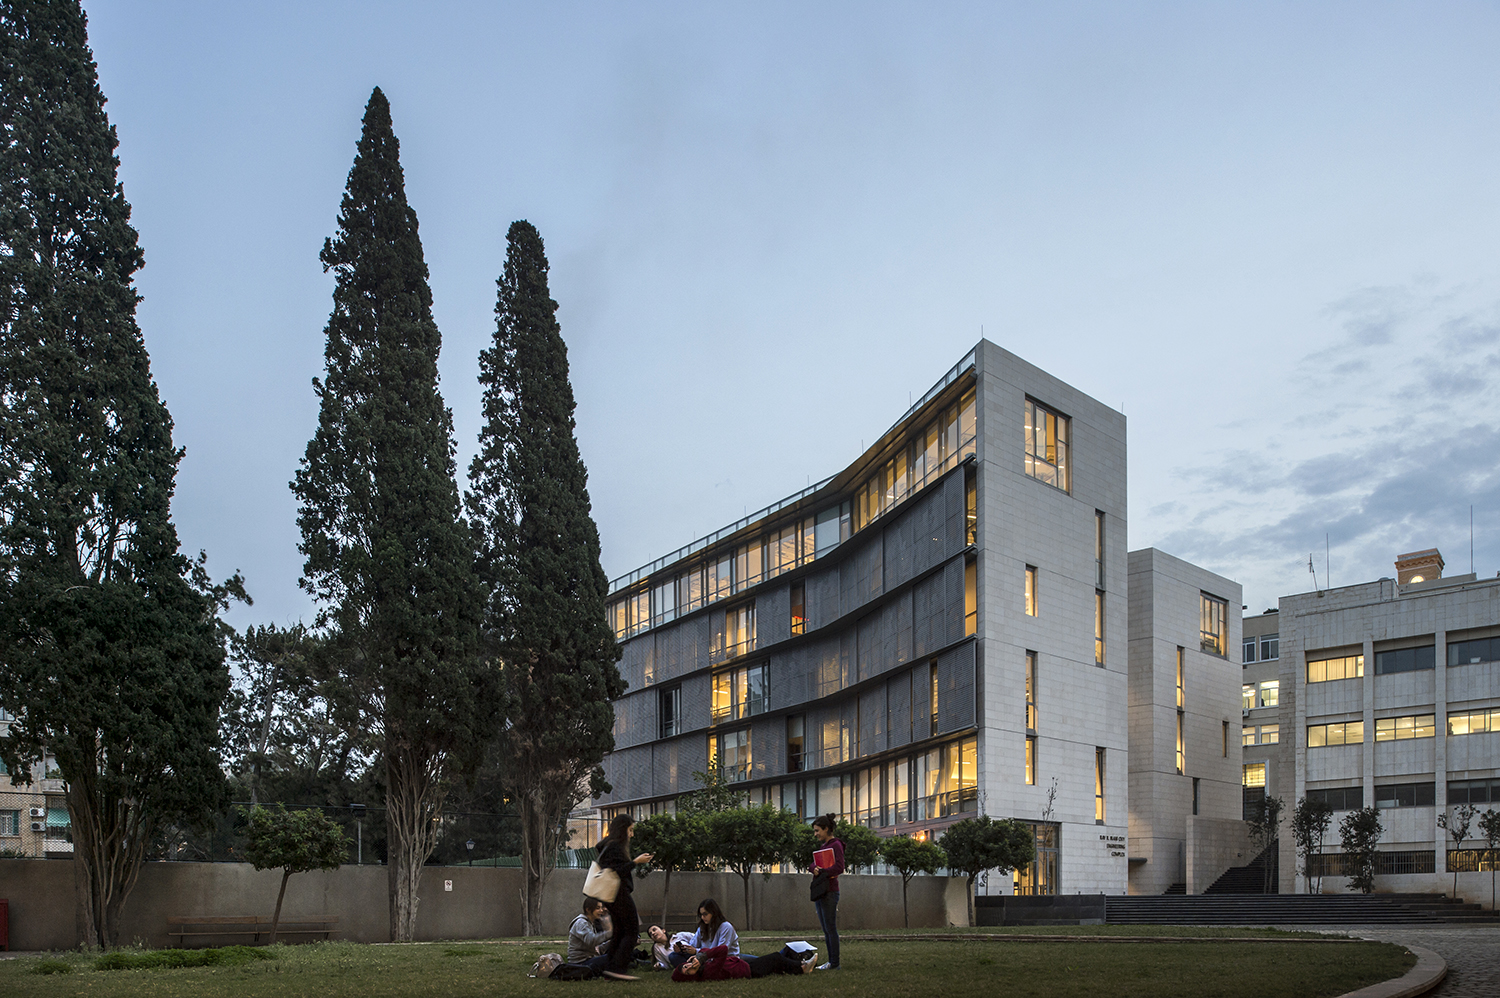 AUB IOEC Engineering Lab - View from oval square